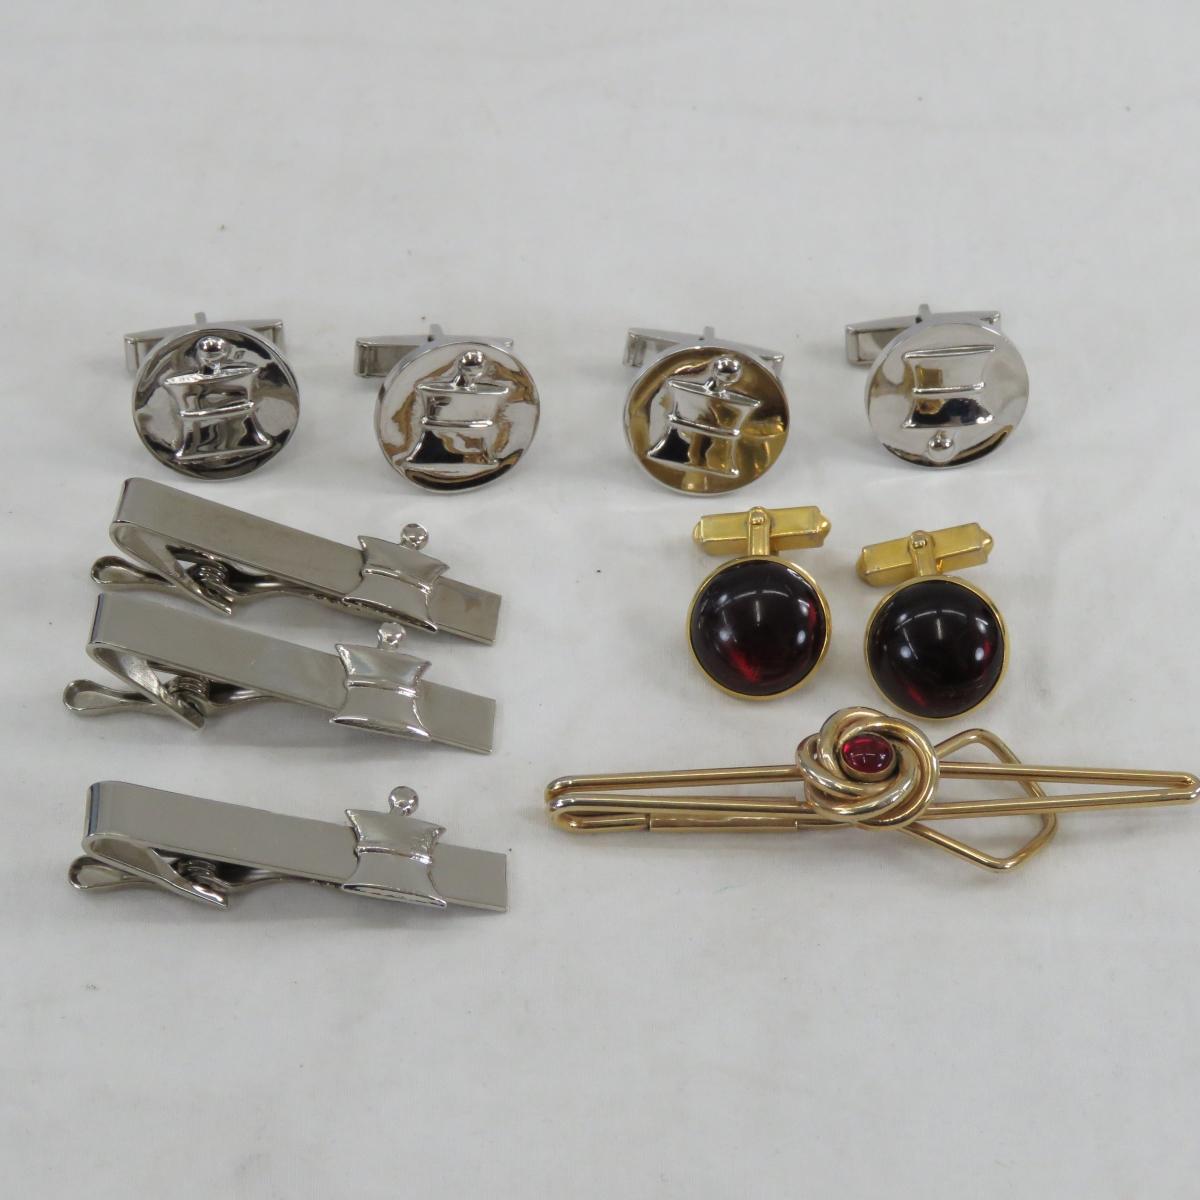 Cufflinks, Sets, Tie Tacs, & Ring in Case